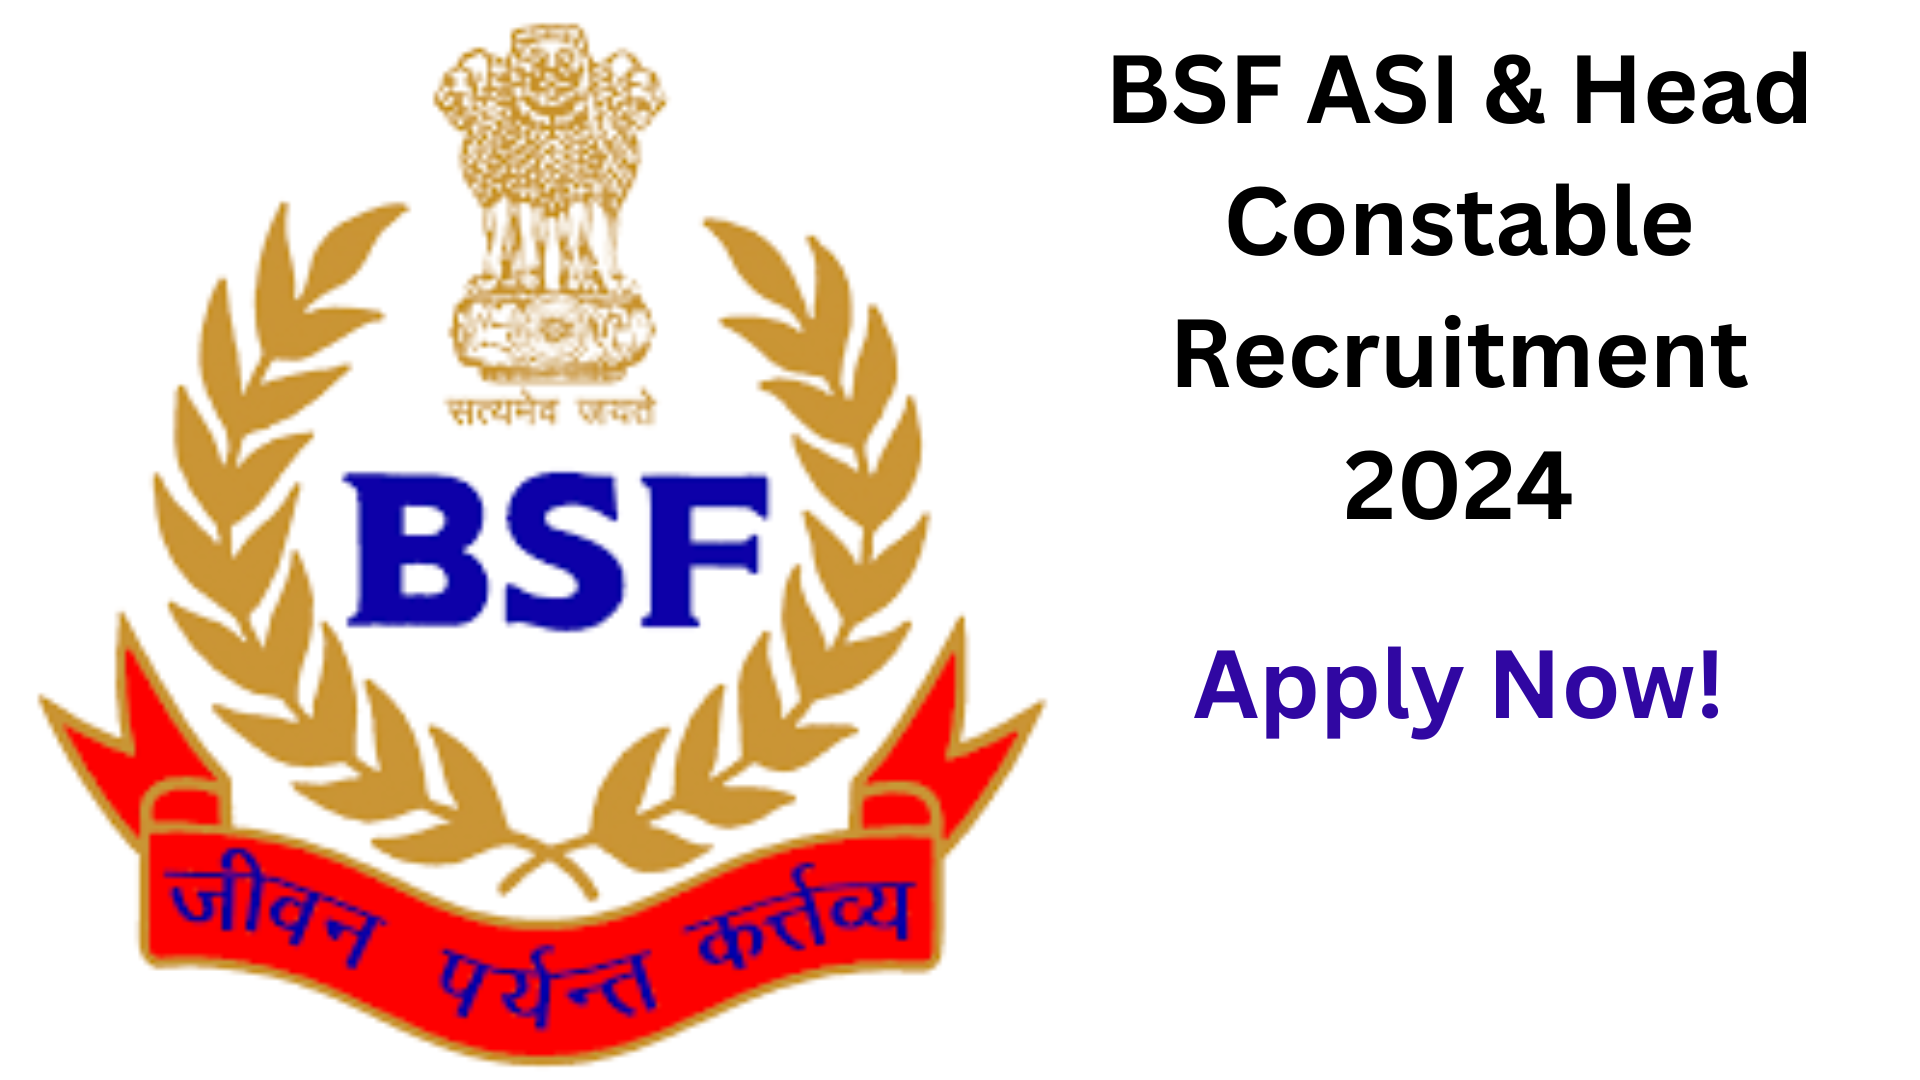 BSF ASI & Head Constable Recruitment 2024, Apply Now, Salary Up To 81,100, Eligibility Criteria, and Other Details